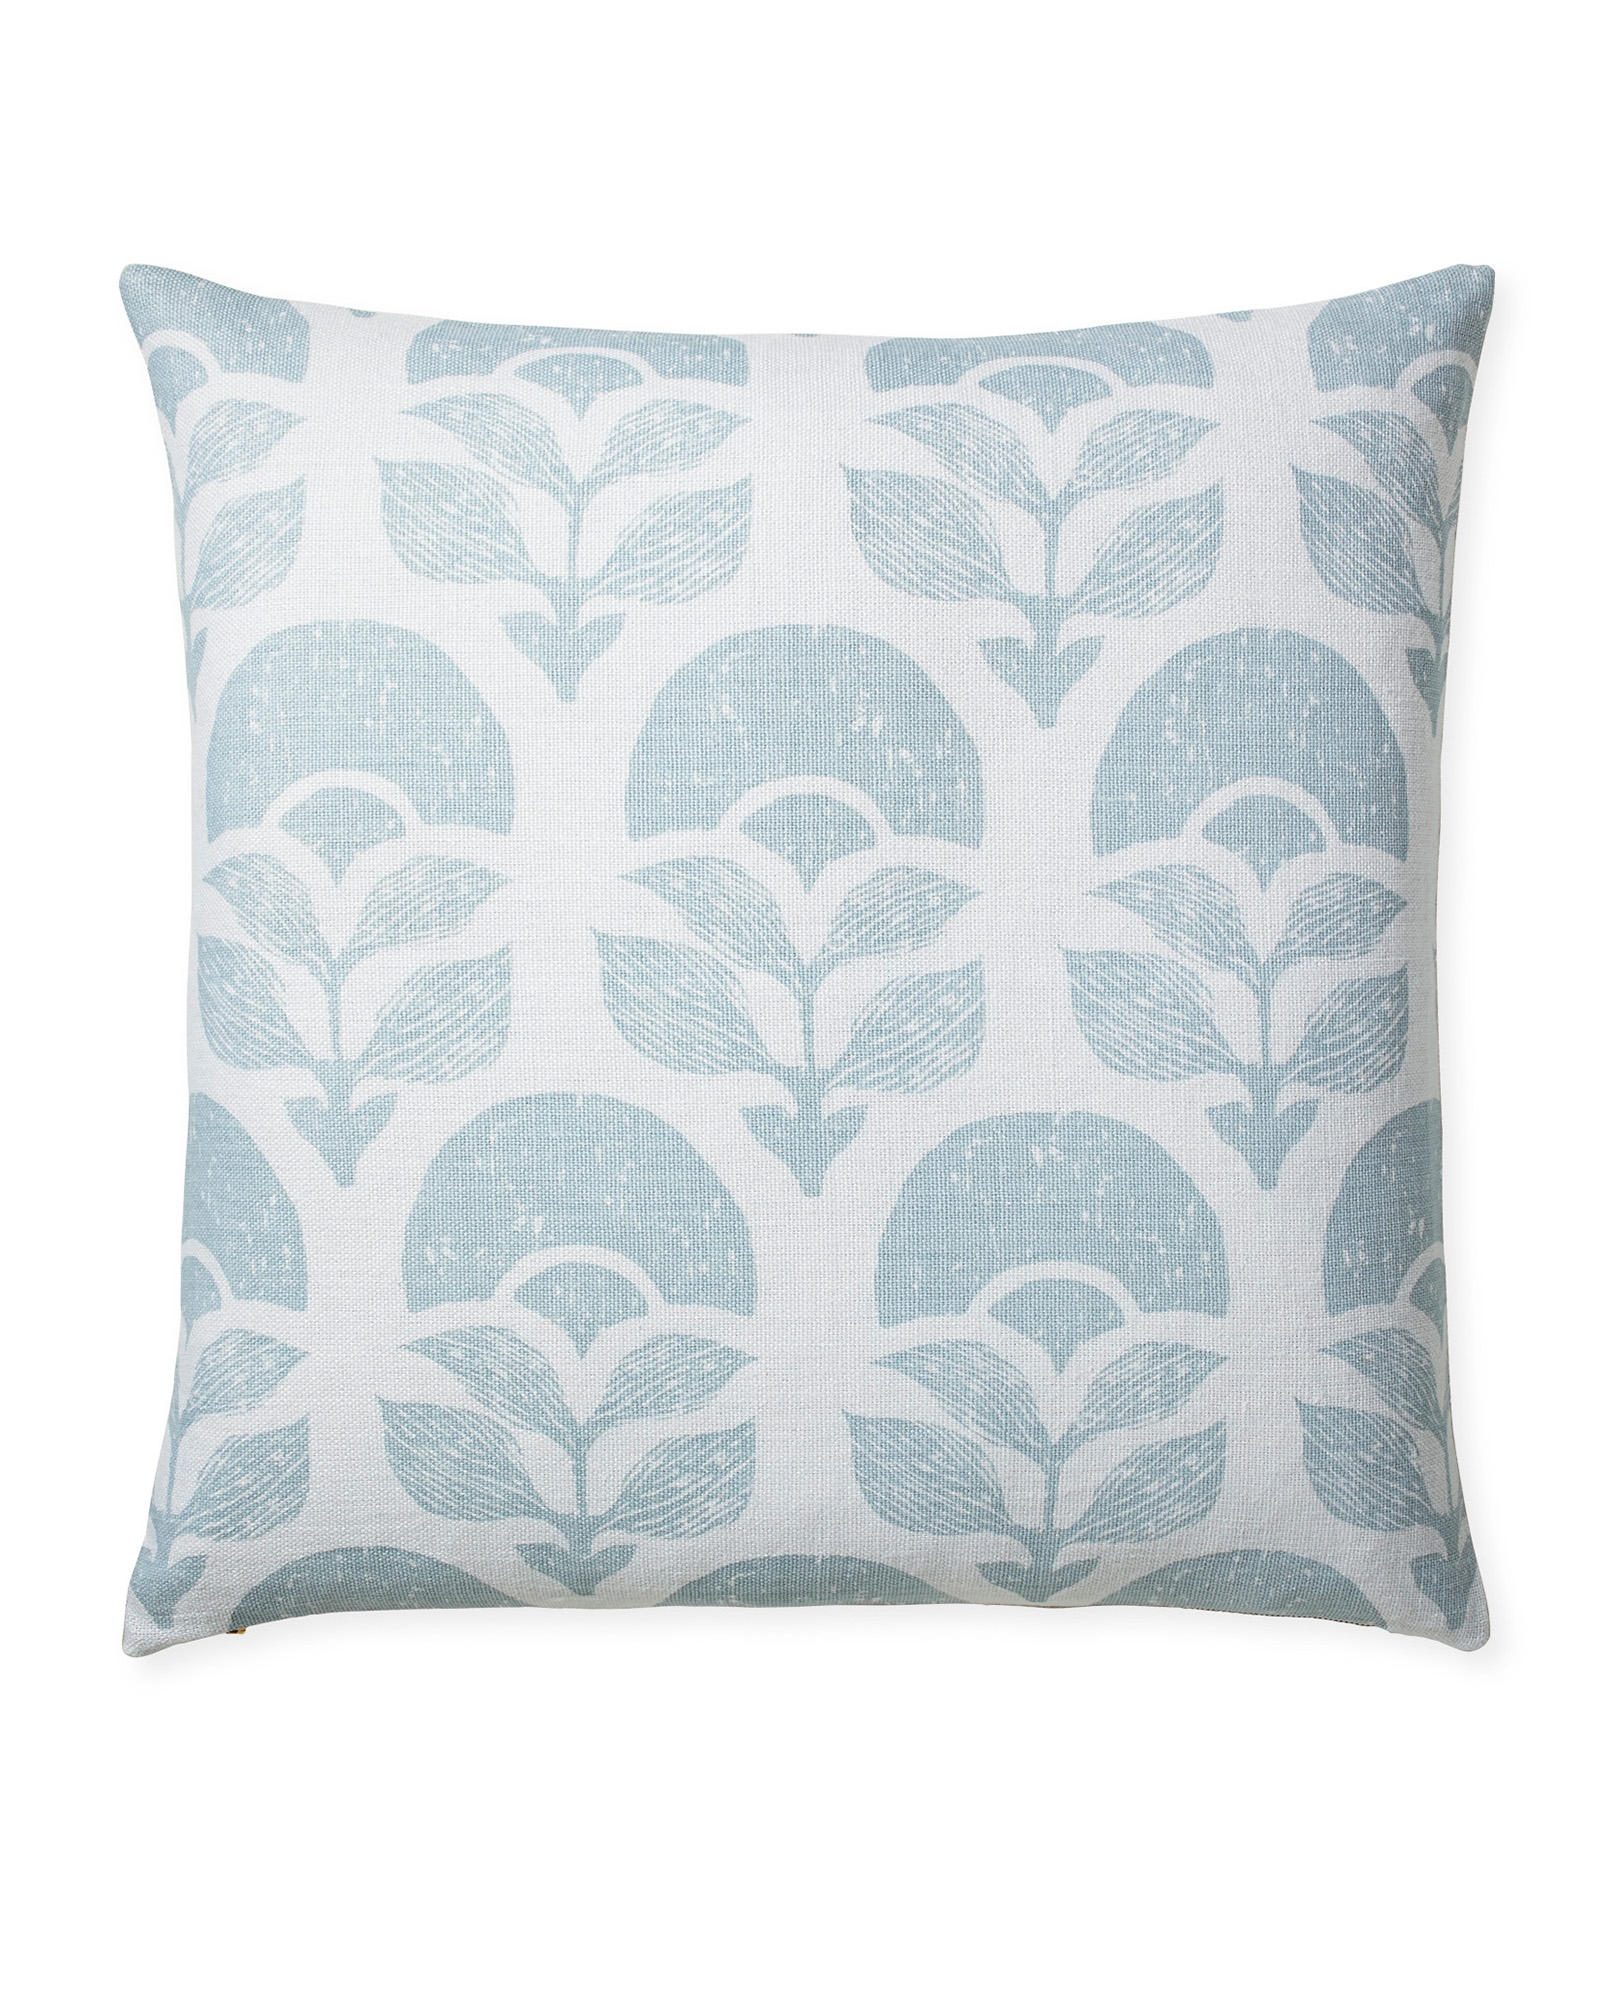 Larkspur 24" Printed Pillow Cover, Sky - Image 0